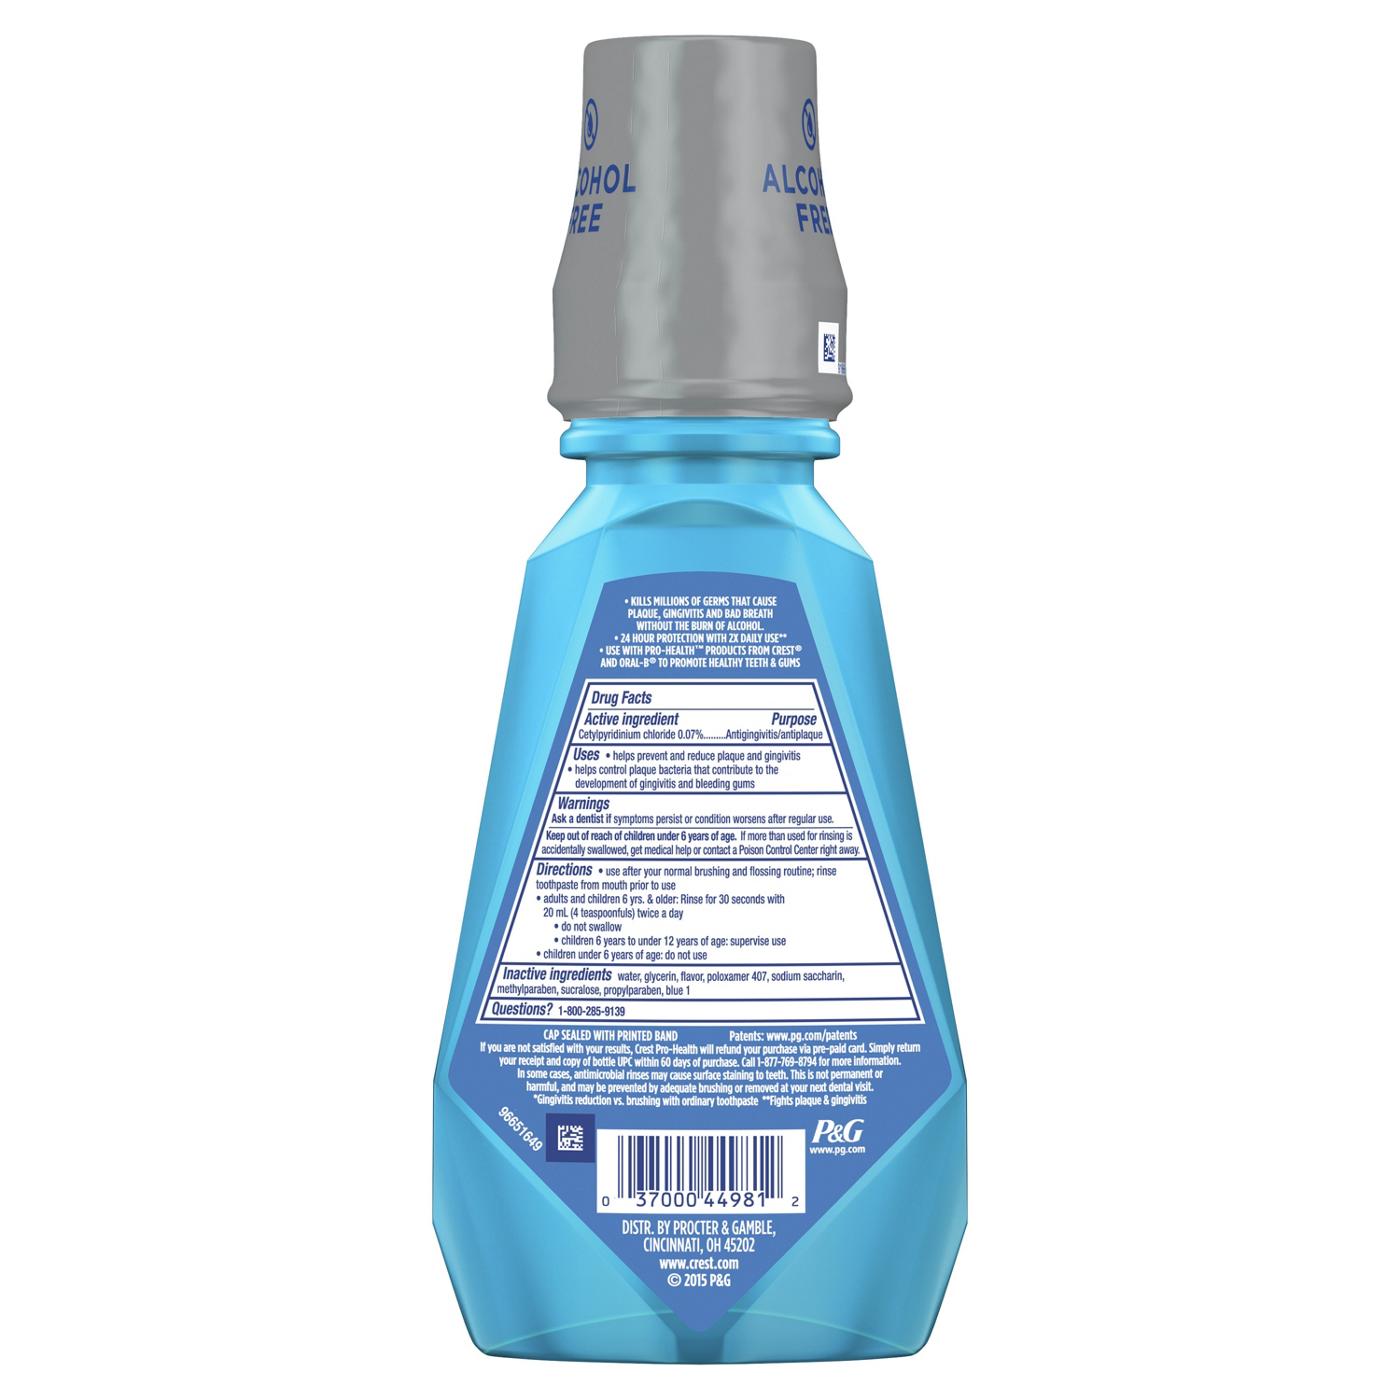 Crest Pro-Health Multi-Protection Mouthwash - Clean Mint; image 5 of 5